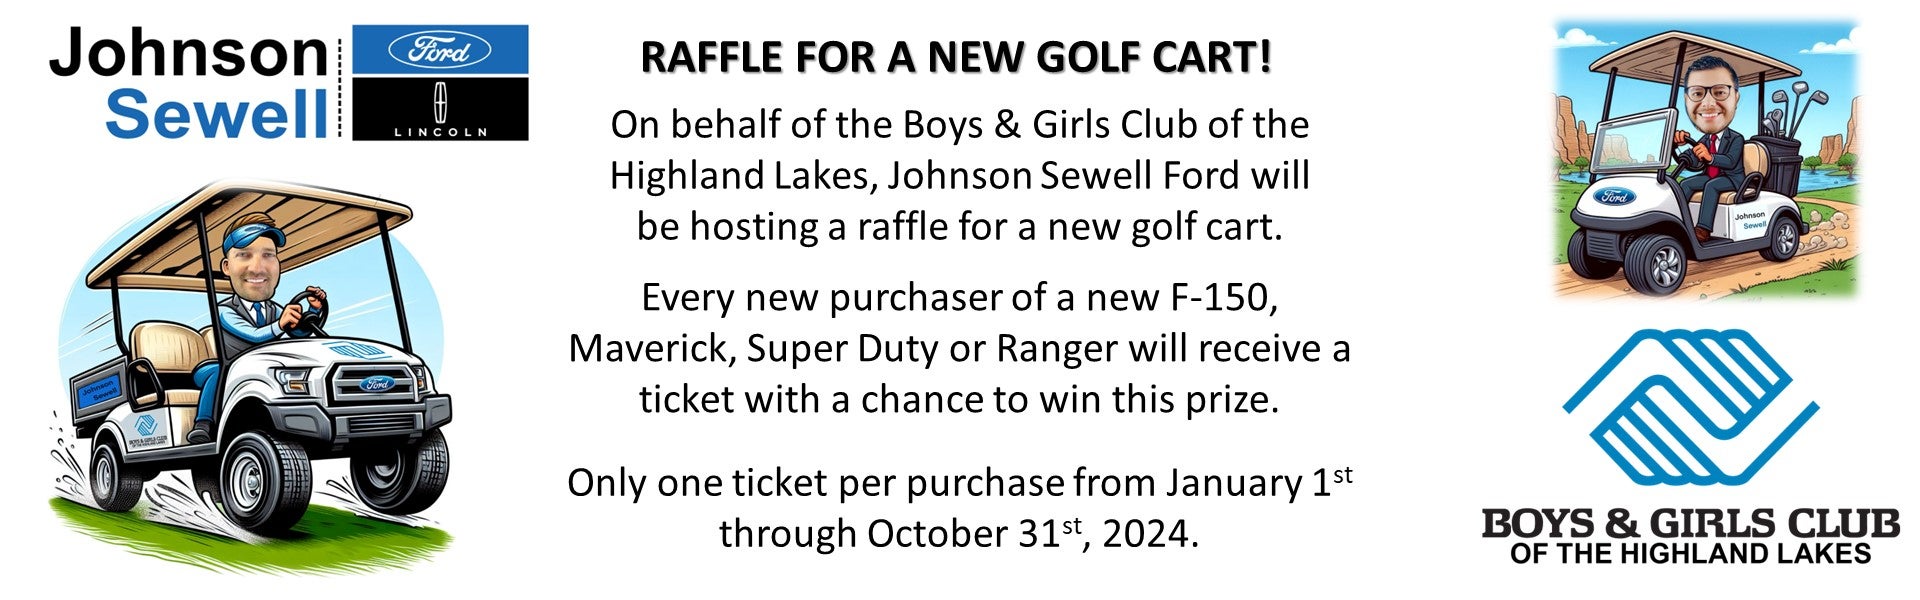 Johnson Sewell Ford Lincoln and Boys and Girls Club Raffle